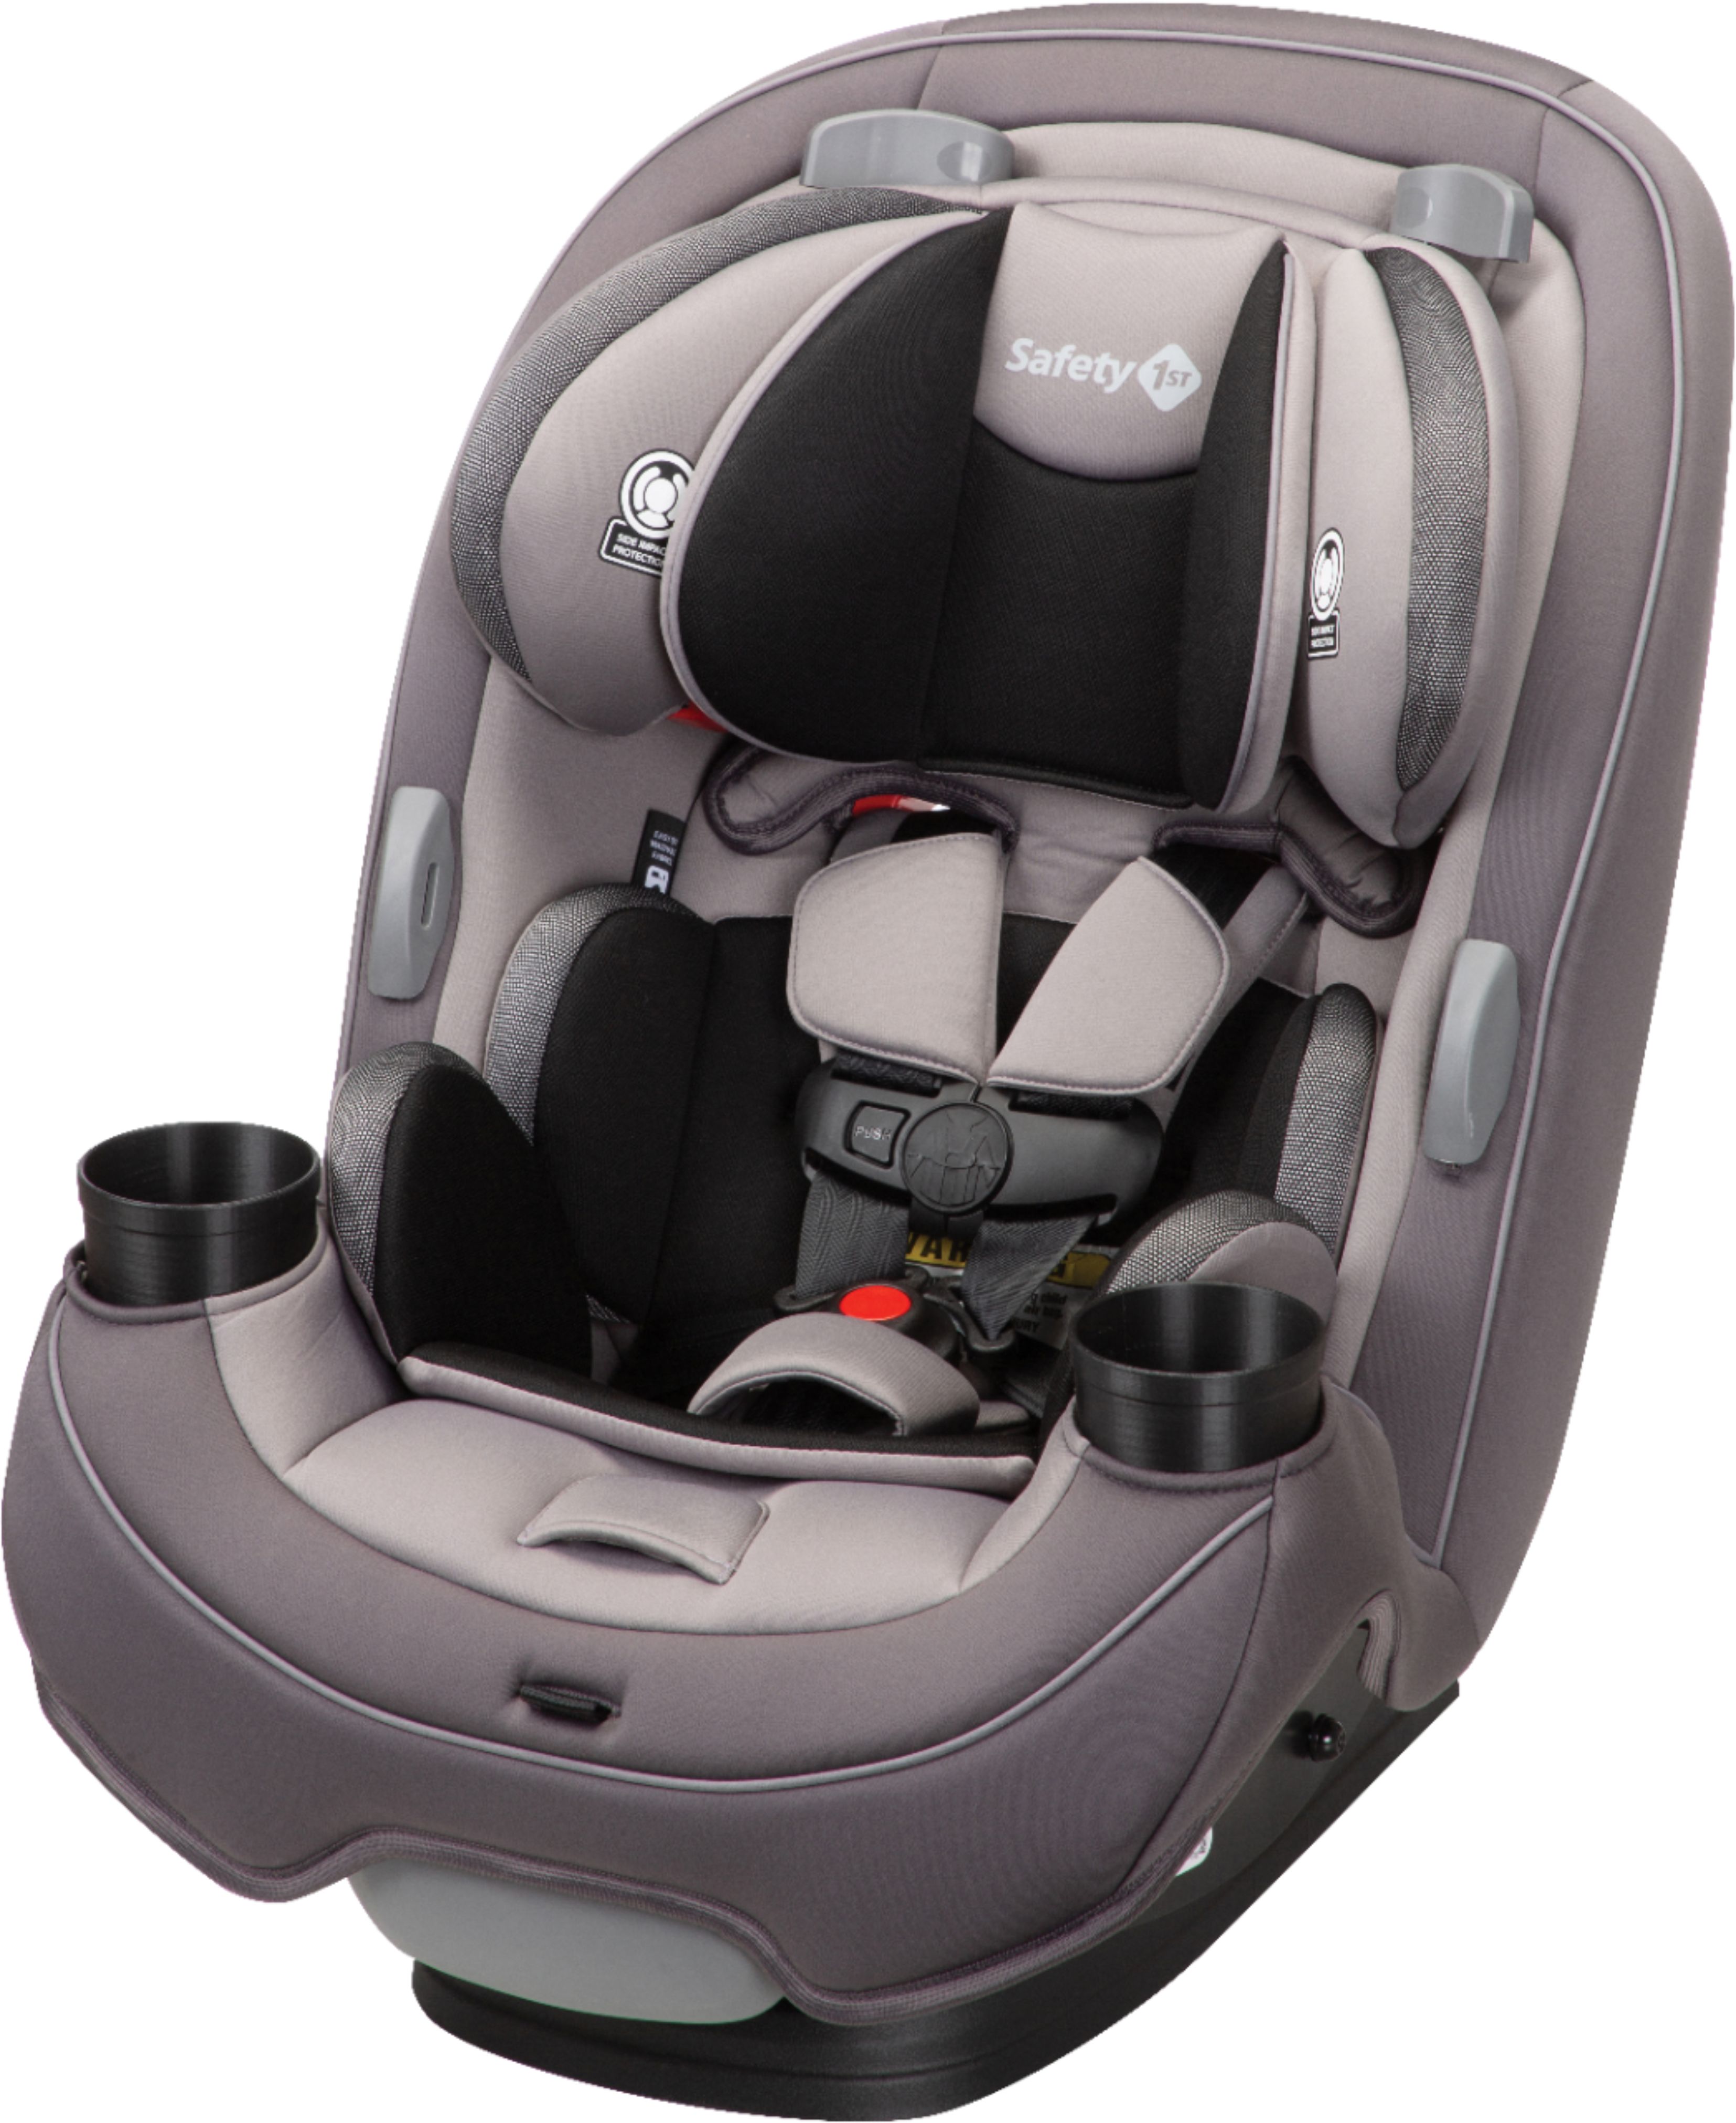 Left View: Safety 1st - Continuum 3-in-1 Car Seat - Black